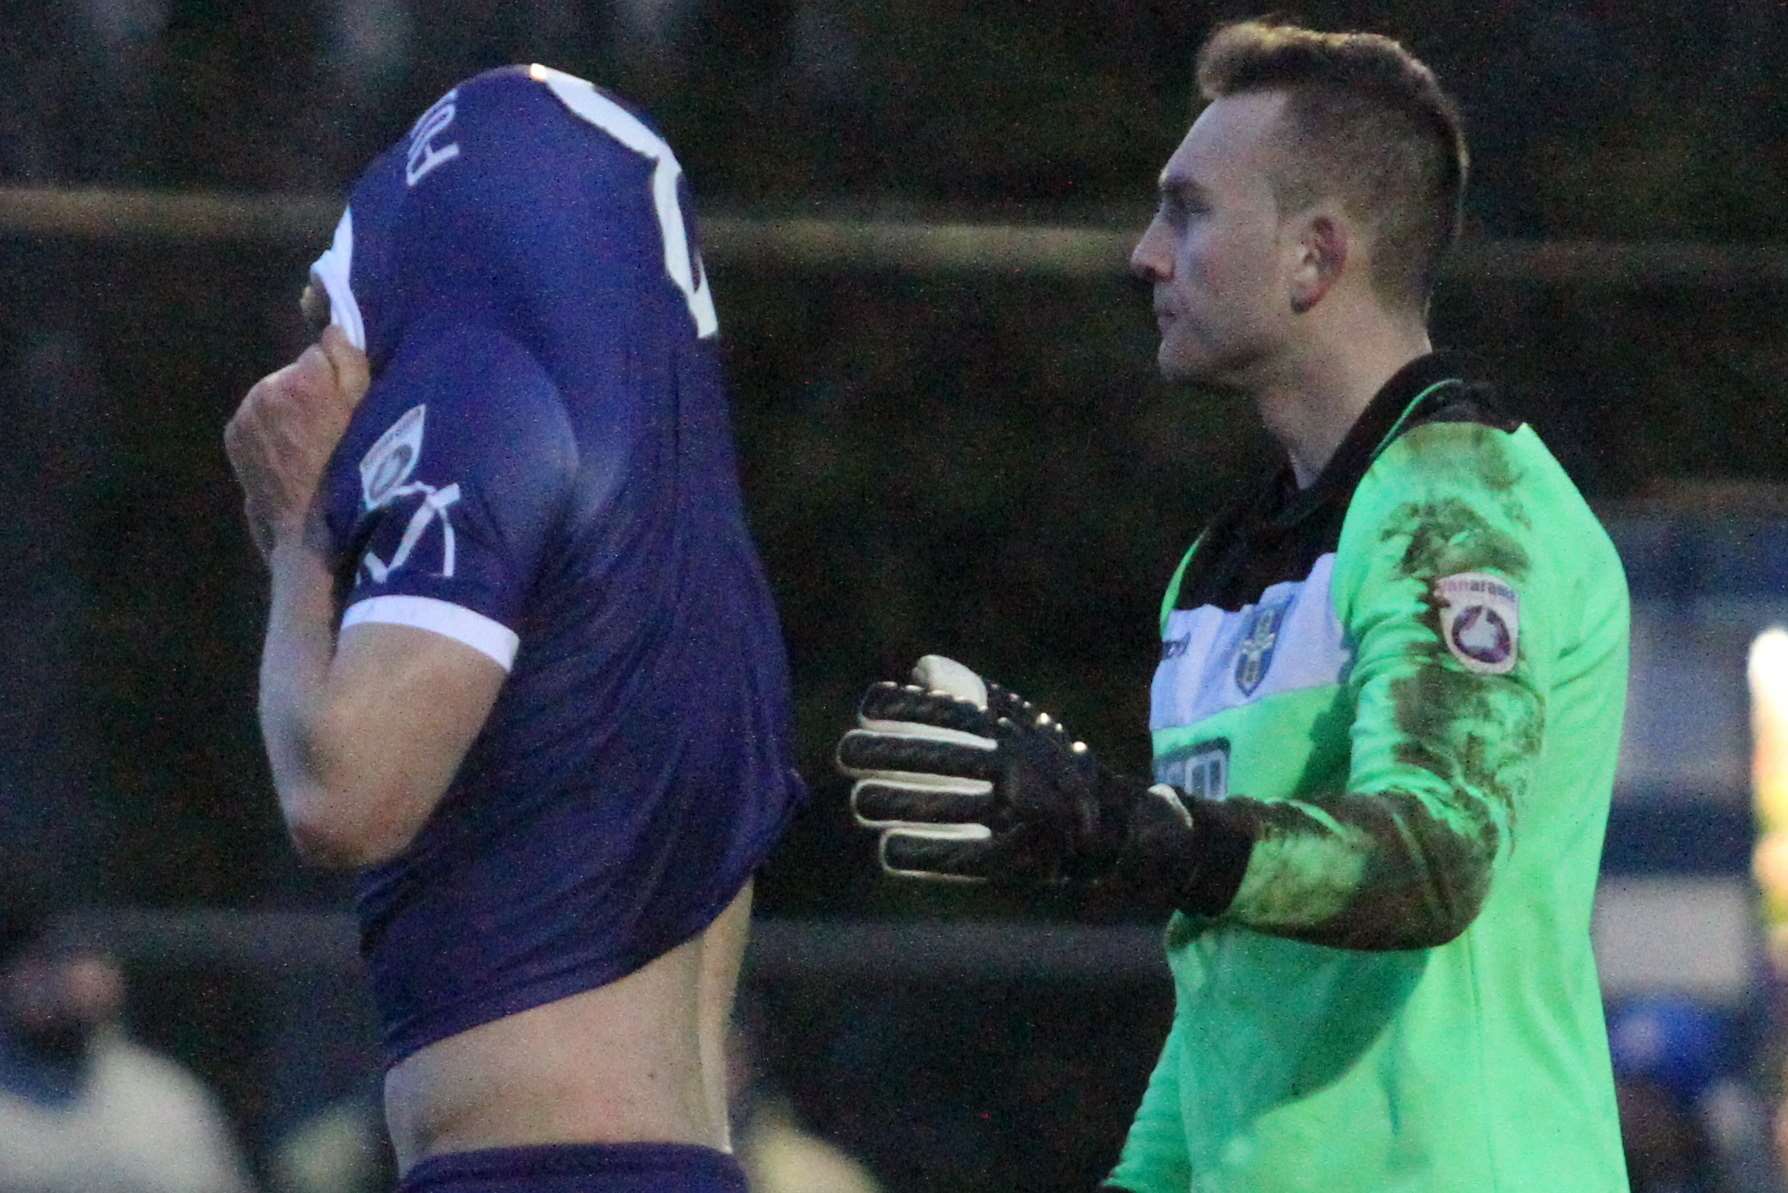 Margate's Lewis Taylor covers his head after his last-minute penalty miss against Bishop's Stortford. The keeper is Ross Fitzsimons. Picture: Don Walker